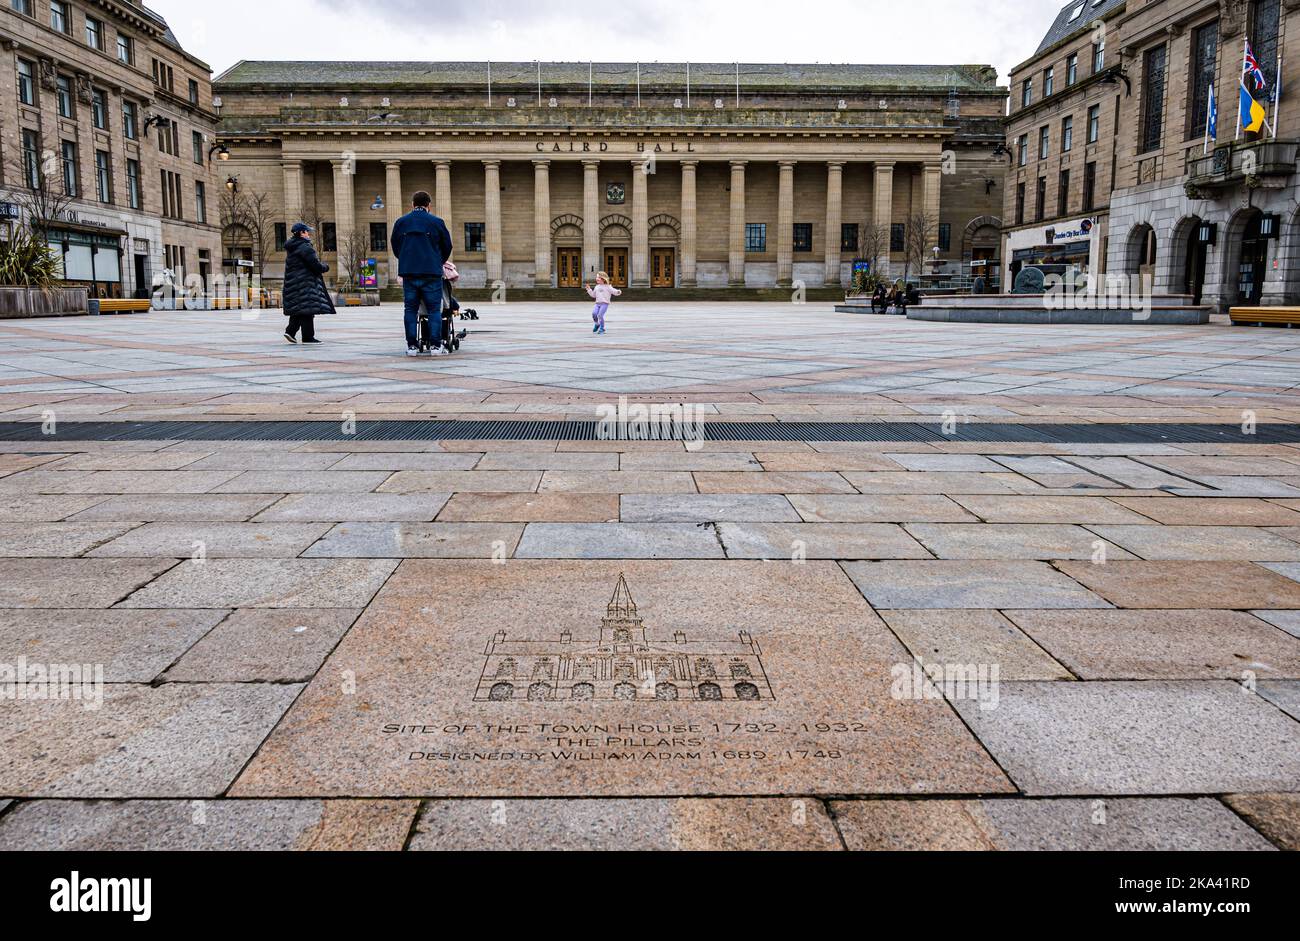 Caird Hall concert venue with William Adam flagstone inscription and child running in square, Dundee city centre, Scotland, UK Stock Photo